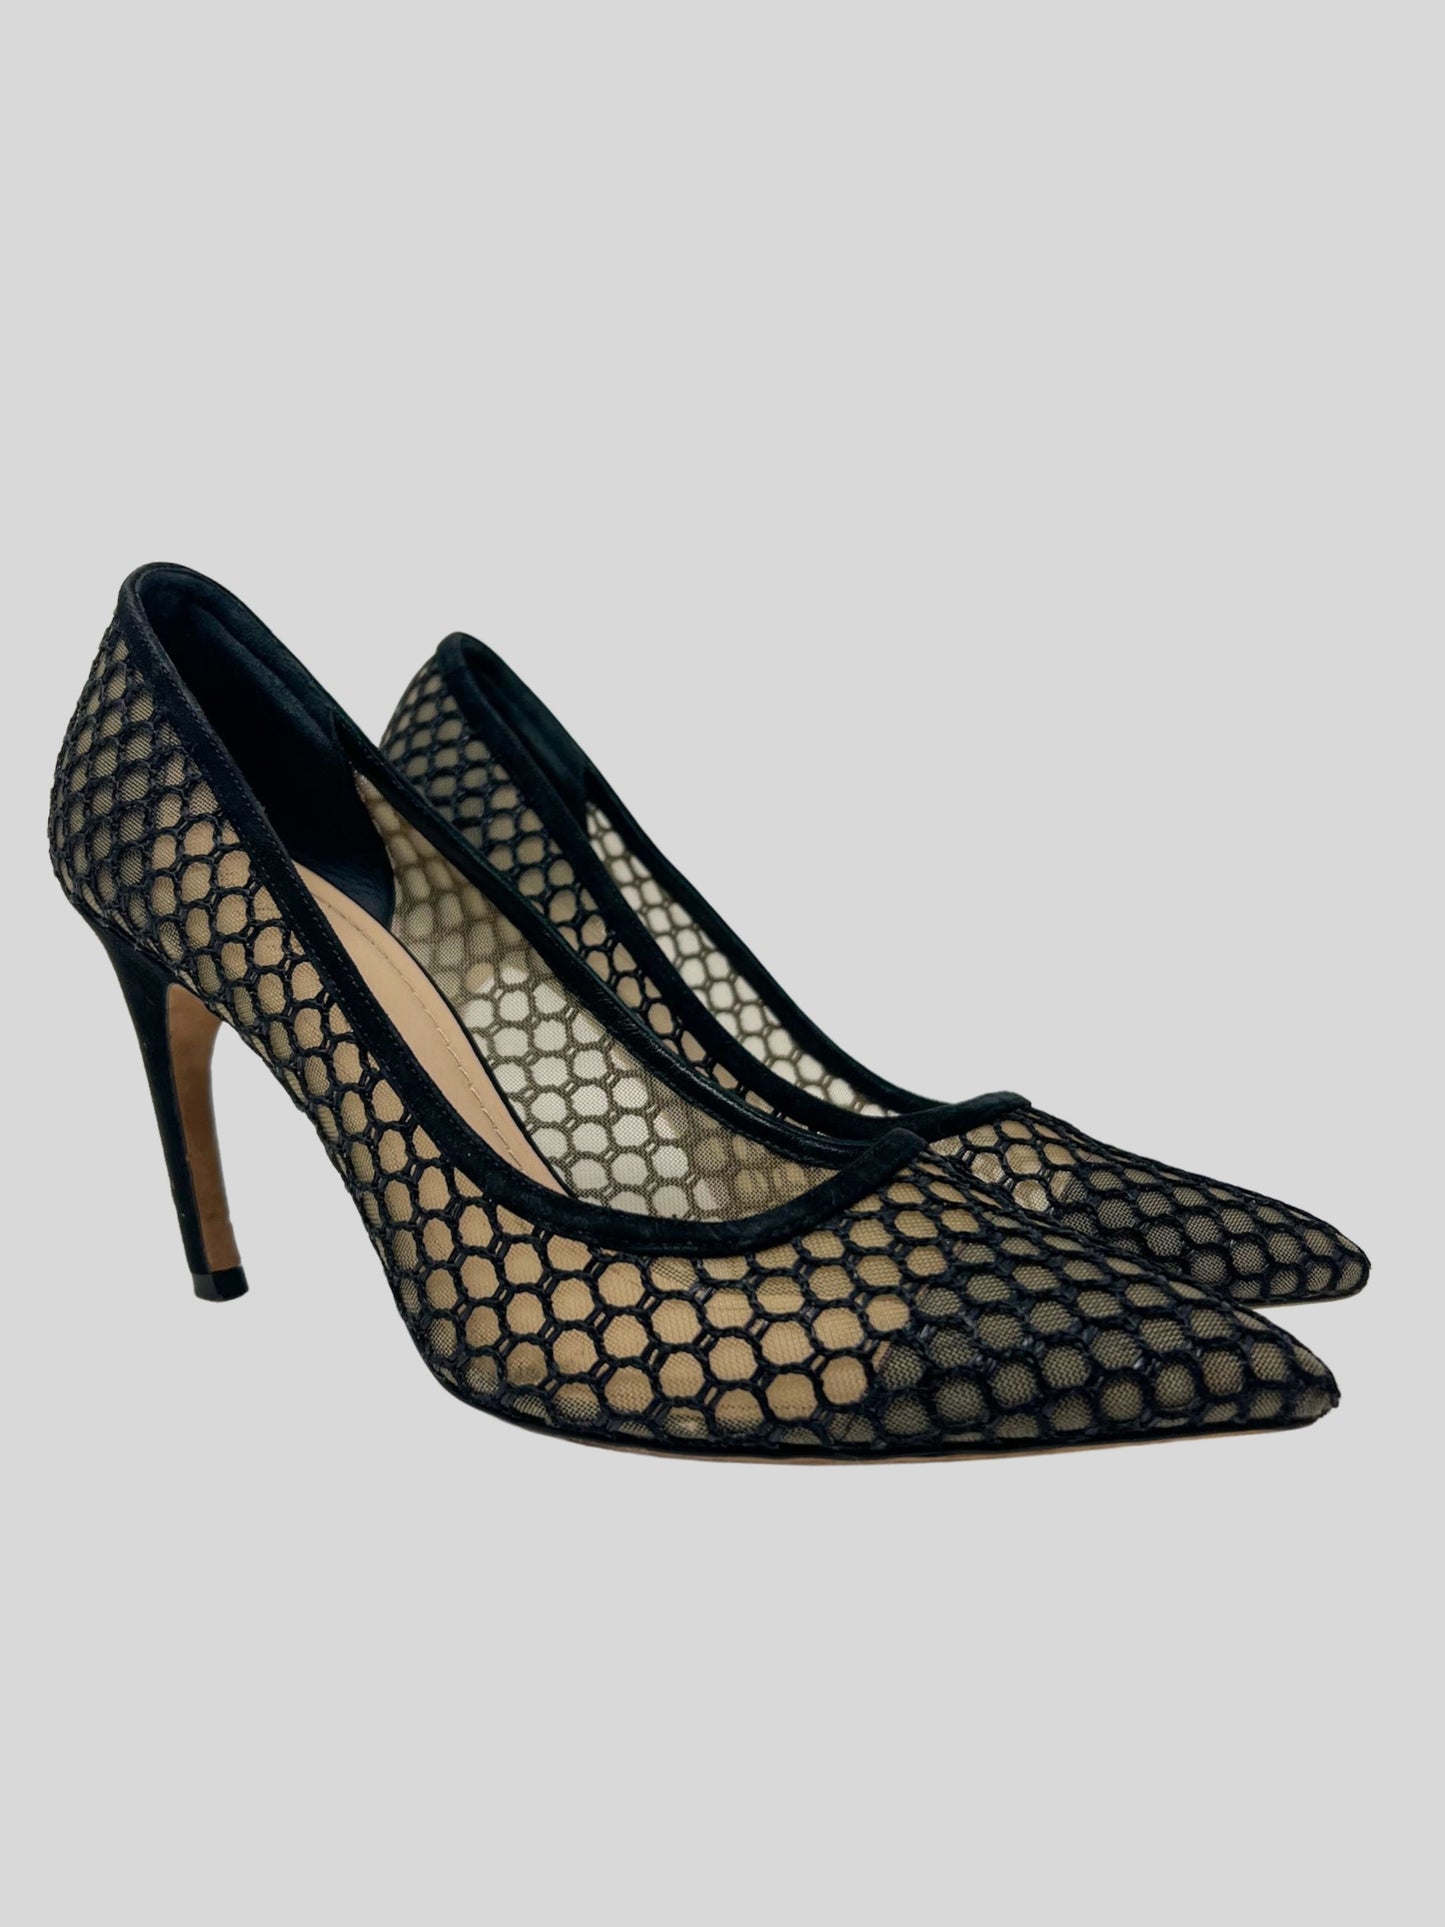 CHRISTIAN DIOR Black Suede and Mesh Pumps - 9 US | 39 IT